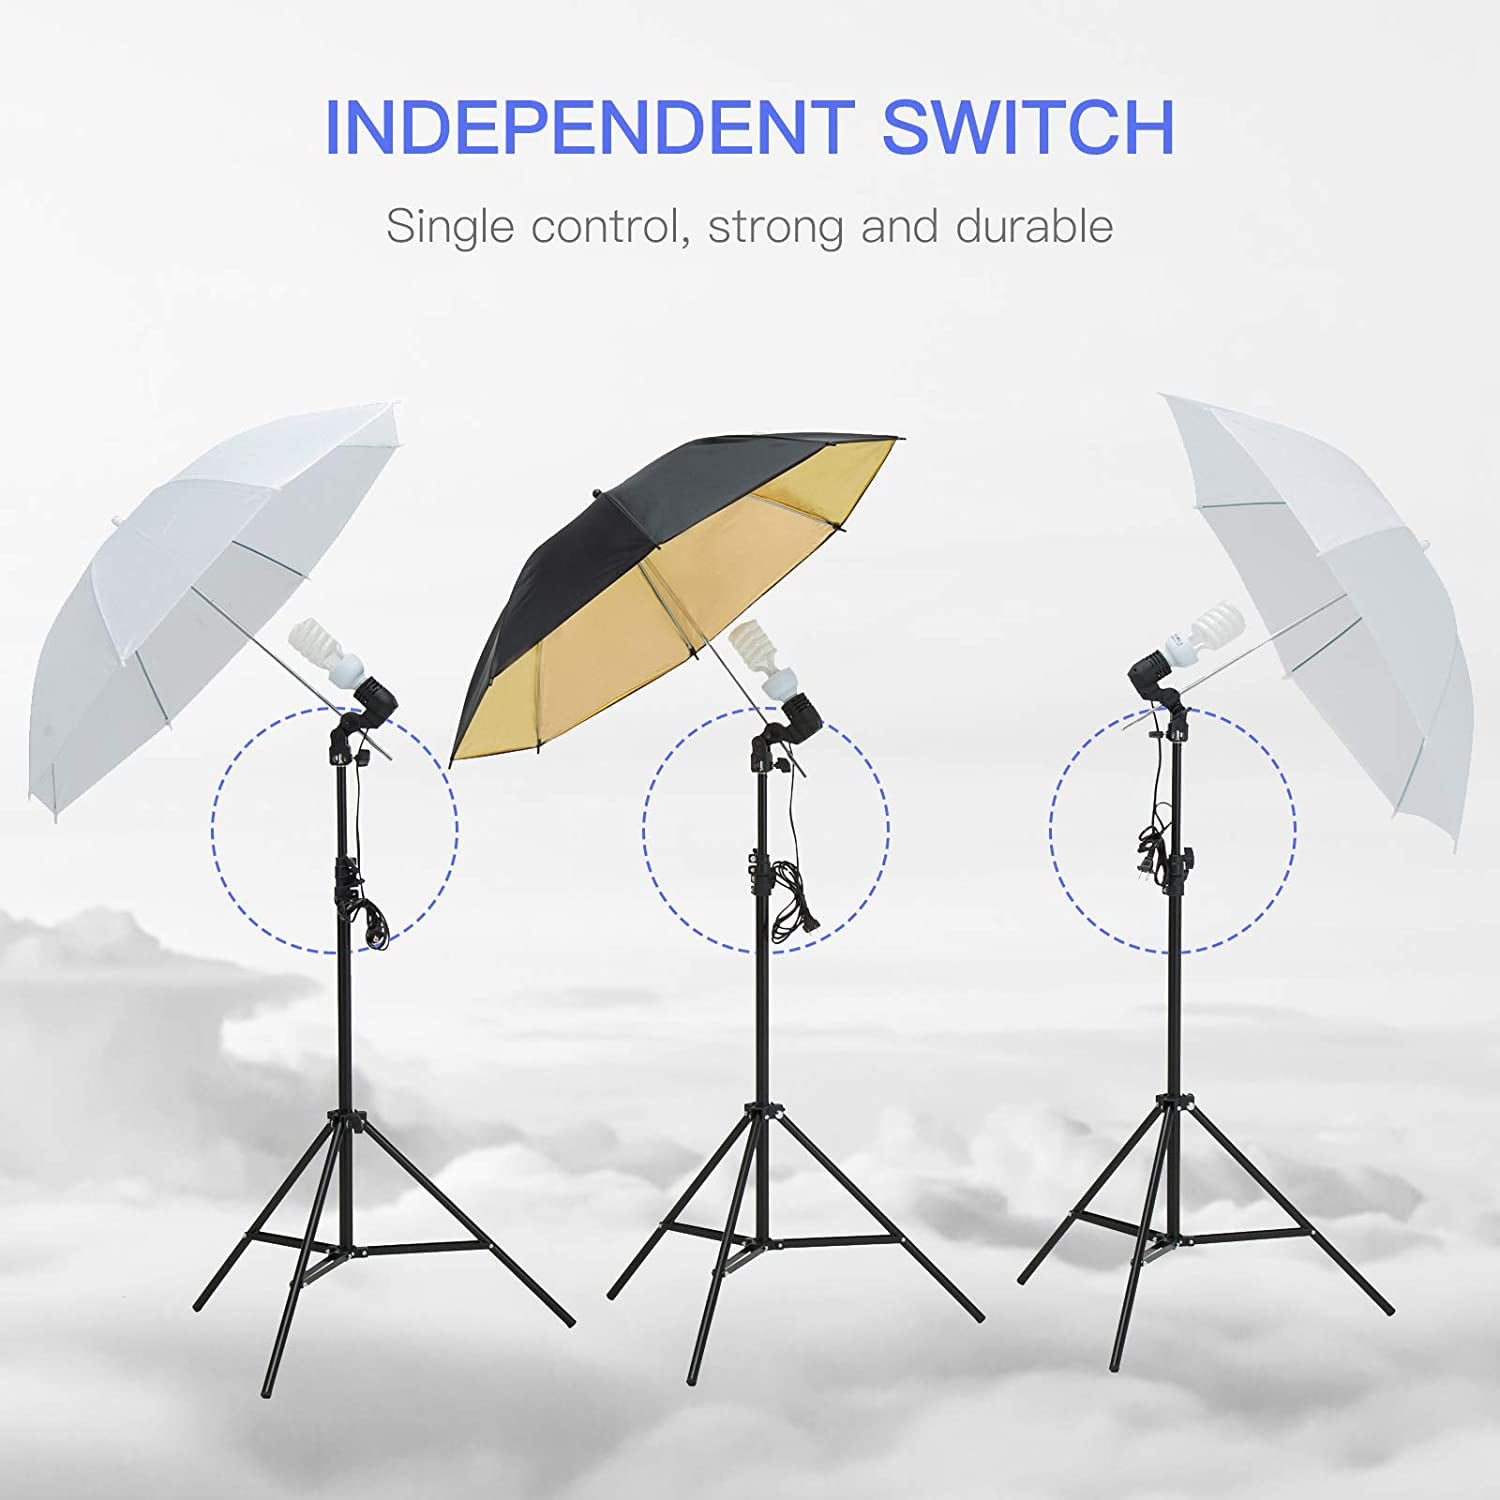 3 Bulbs Continuous Lights with 10ft Background Support Stand System Backdrop Portable Bag Portfolio Shooting SUNCOO Video Studio Umbrella Lighting Kit,Green Screen with Stand